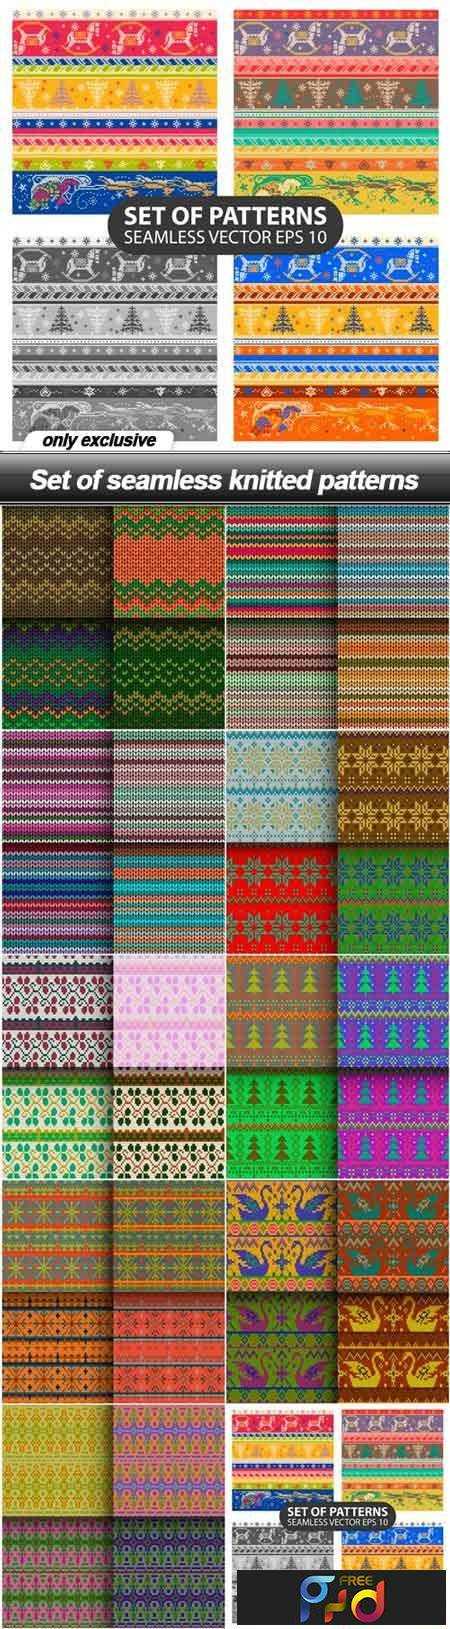 FreePsdVn.com_VECTOR_1701154_set_of_seamless_knitted_patterns_10_eps